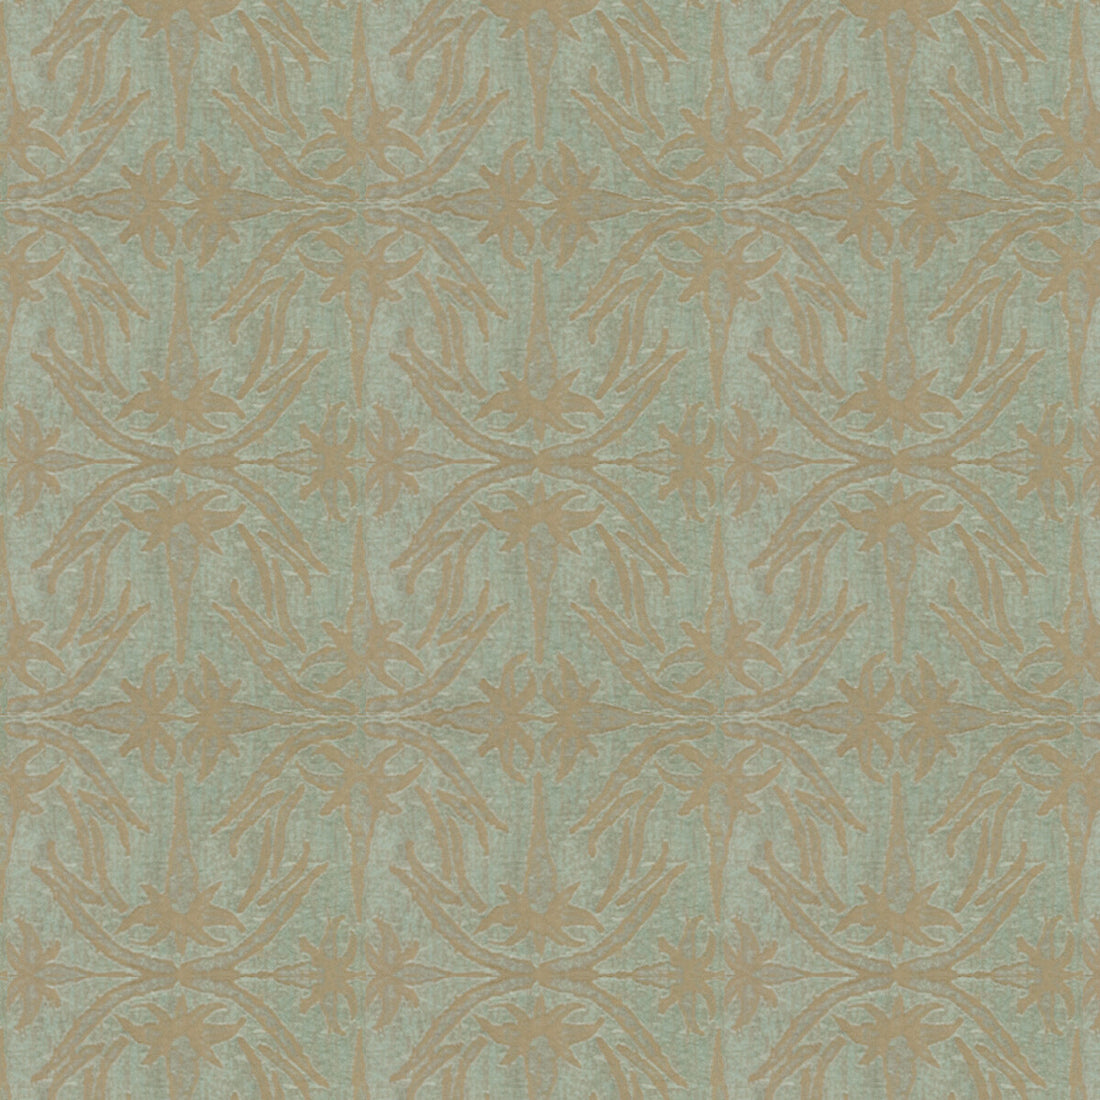 Lily Branch fabric in aqua color - pattern GWF-2926.13.0 - by Lee Jofa Modern in the Allegra Hicks II collection